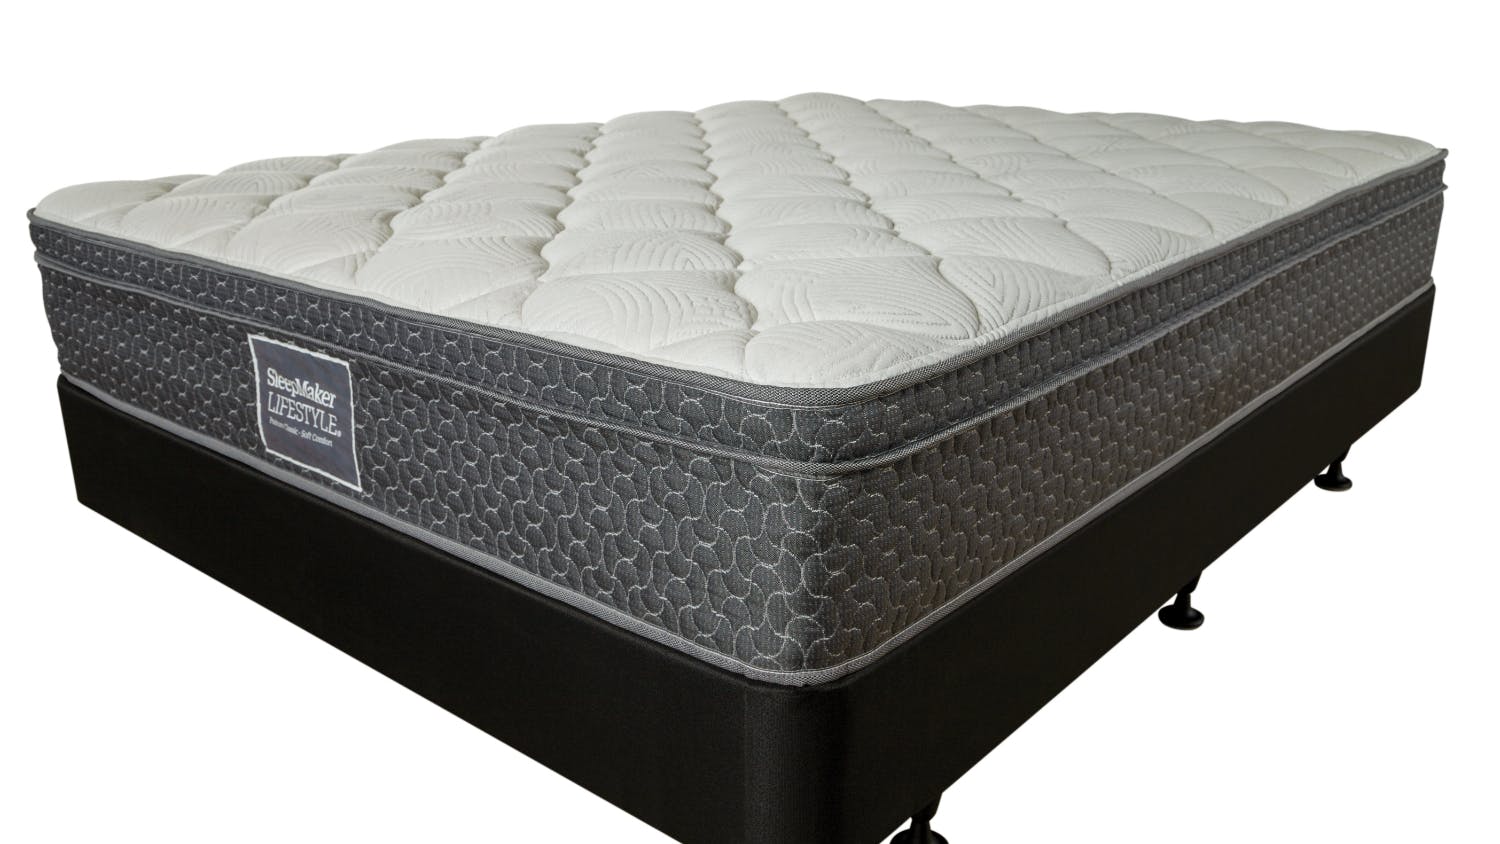 Posture Classic Soft Queen Mattress and Base by SleepMaker